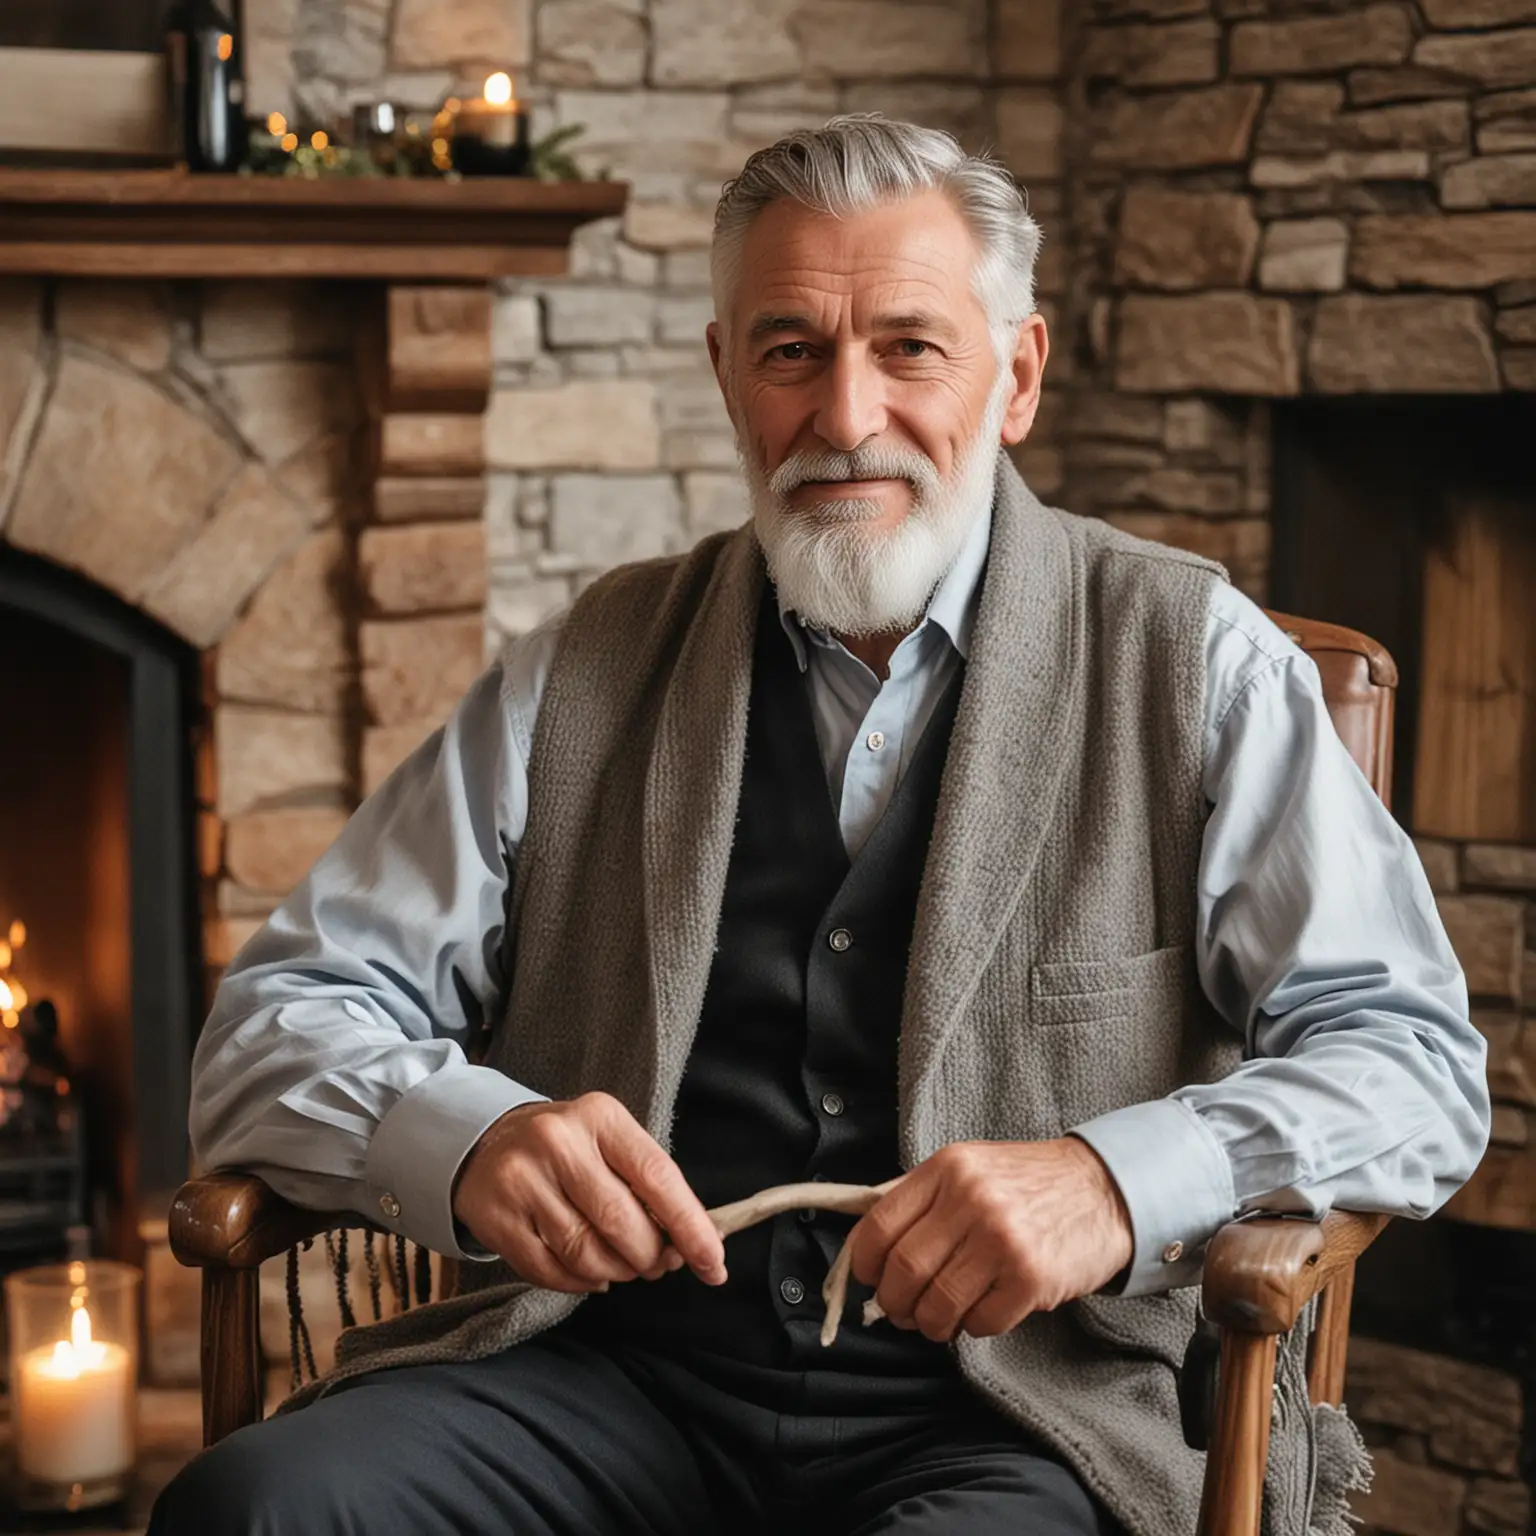 Elderly Man Relaxing by Fireplace in Rocking Chair